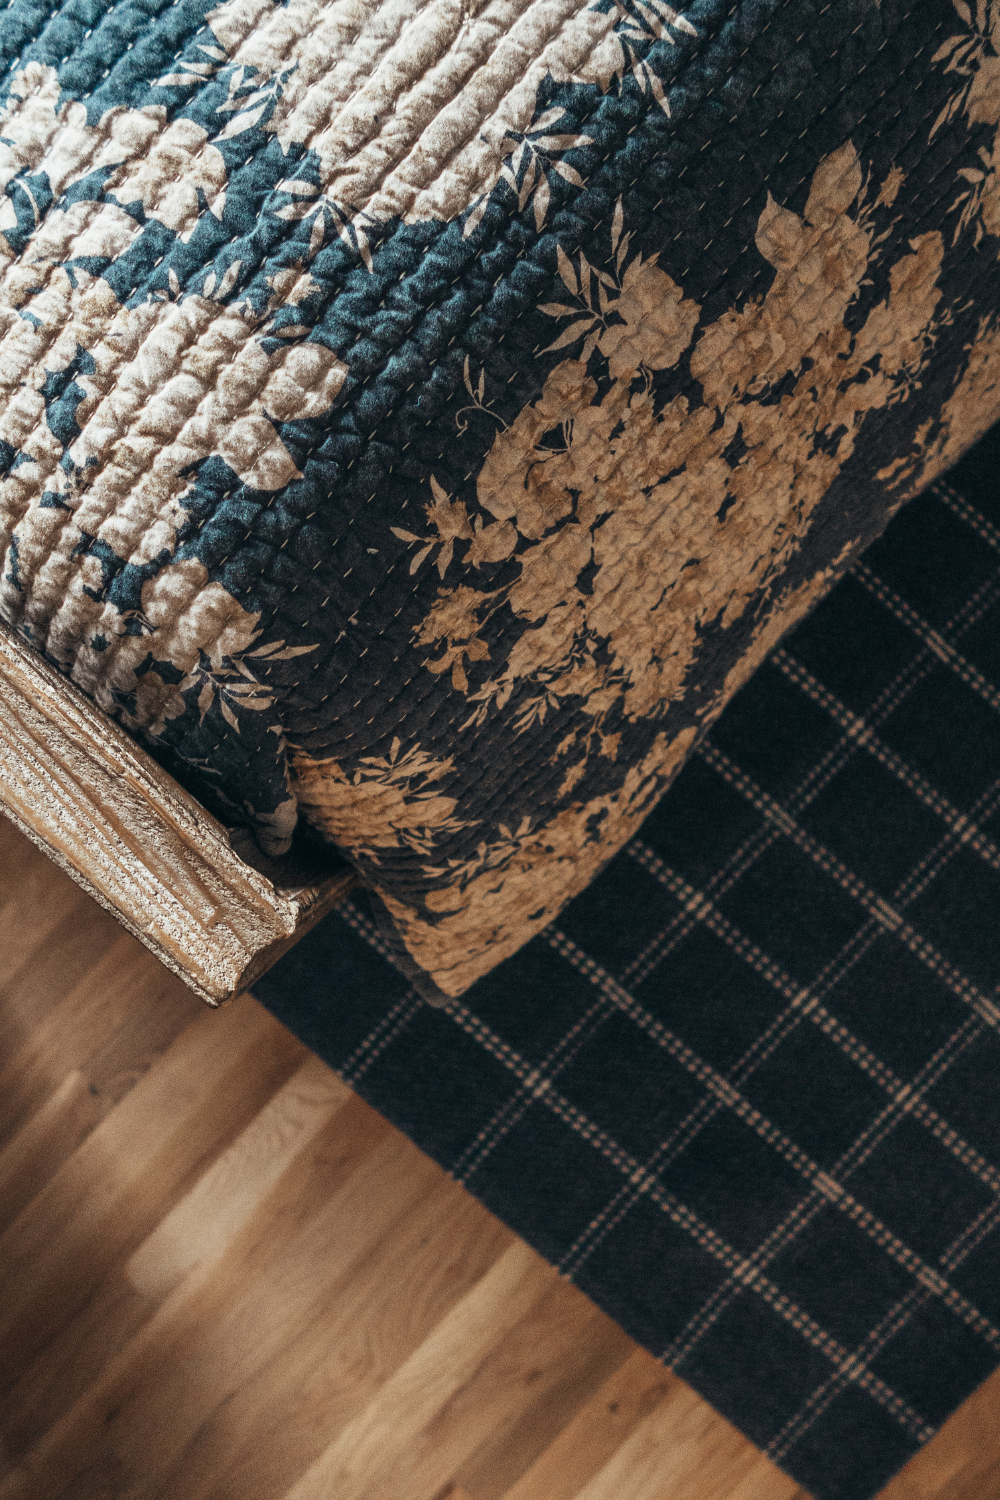 how to mix and match patterns, Patterned Area Rug in Home Decor, Close-Up of Mixed Patterned Fabrics for Home Textiles